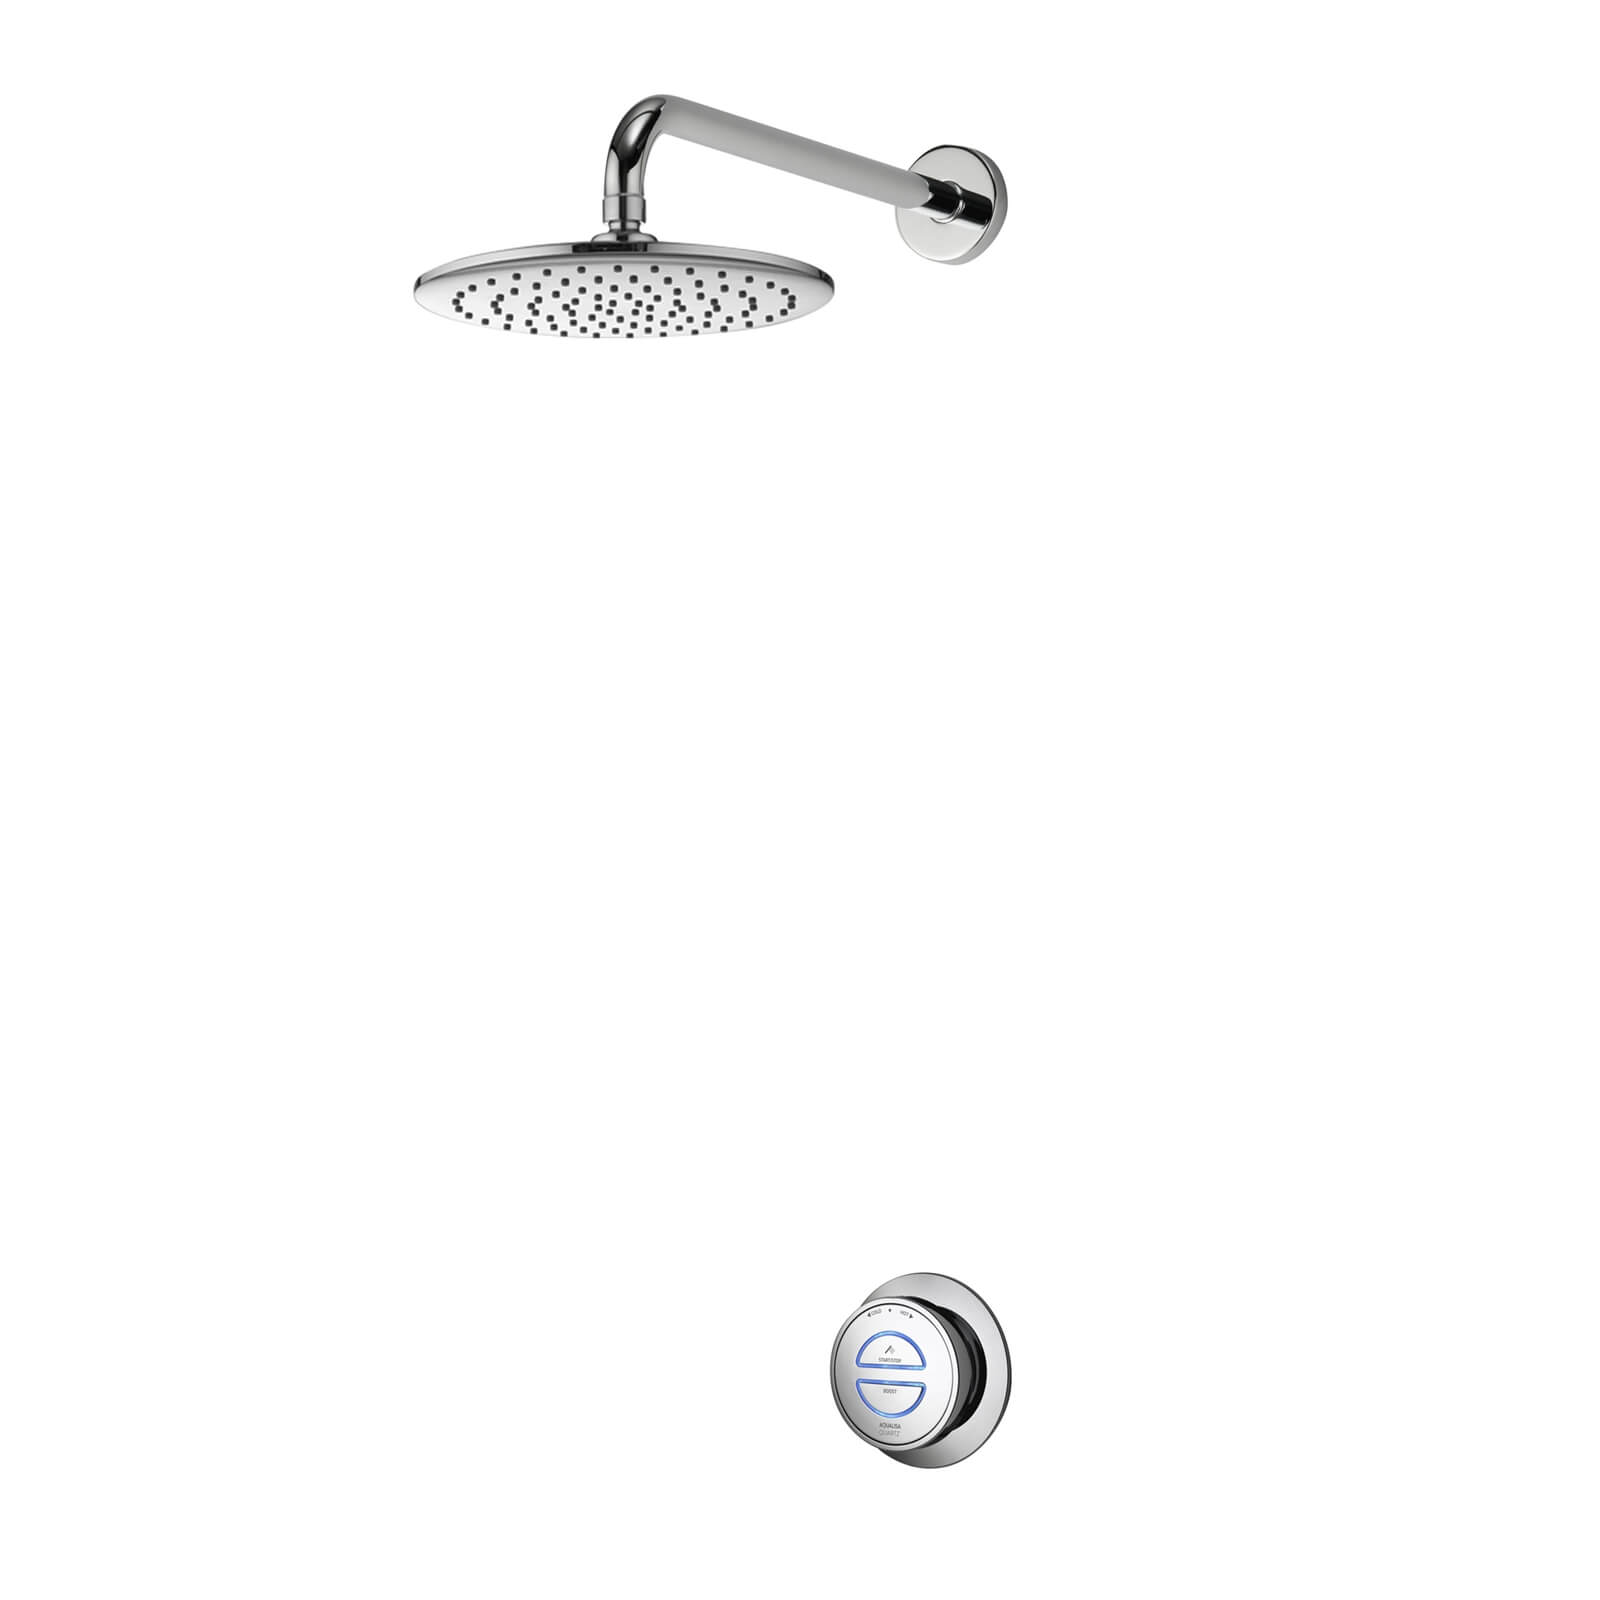 Aqualisa Quartz Concealed with Fixed Ceiling Head - Gravity Fed